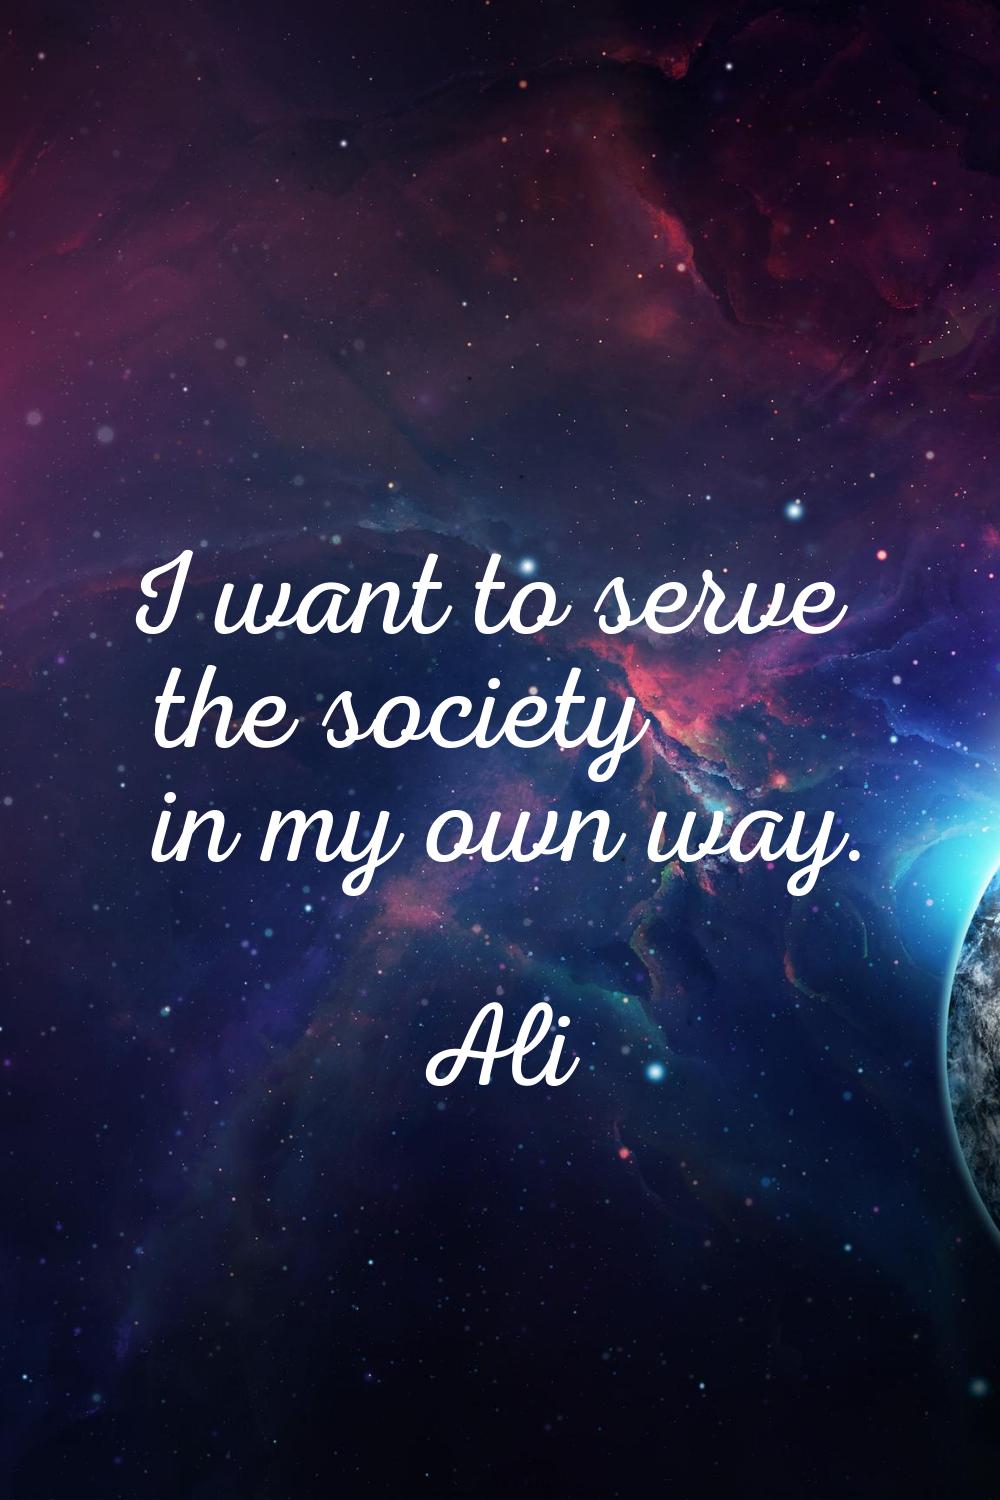 I want to serve the society in my own way.